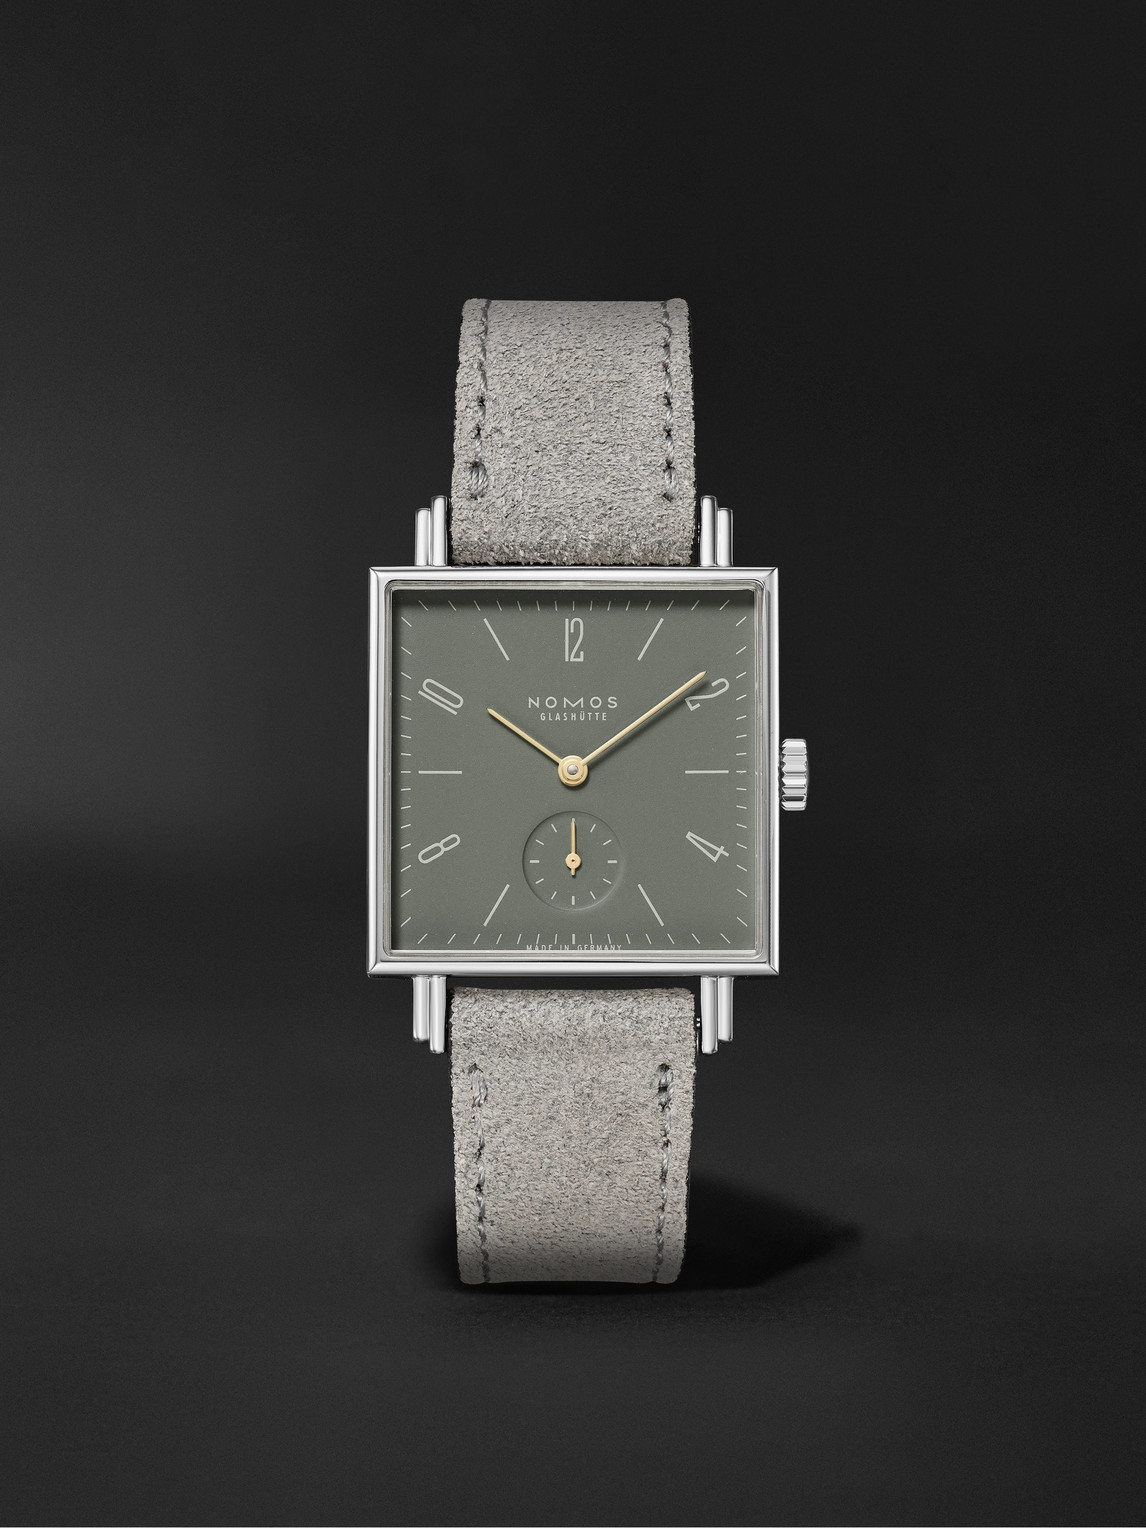 Nomos Glashütte Tetra Ode To Joy Hand-wound 29.5mm Stainless Steel And Leather Watch, Ref. No. 445 In Green